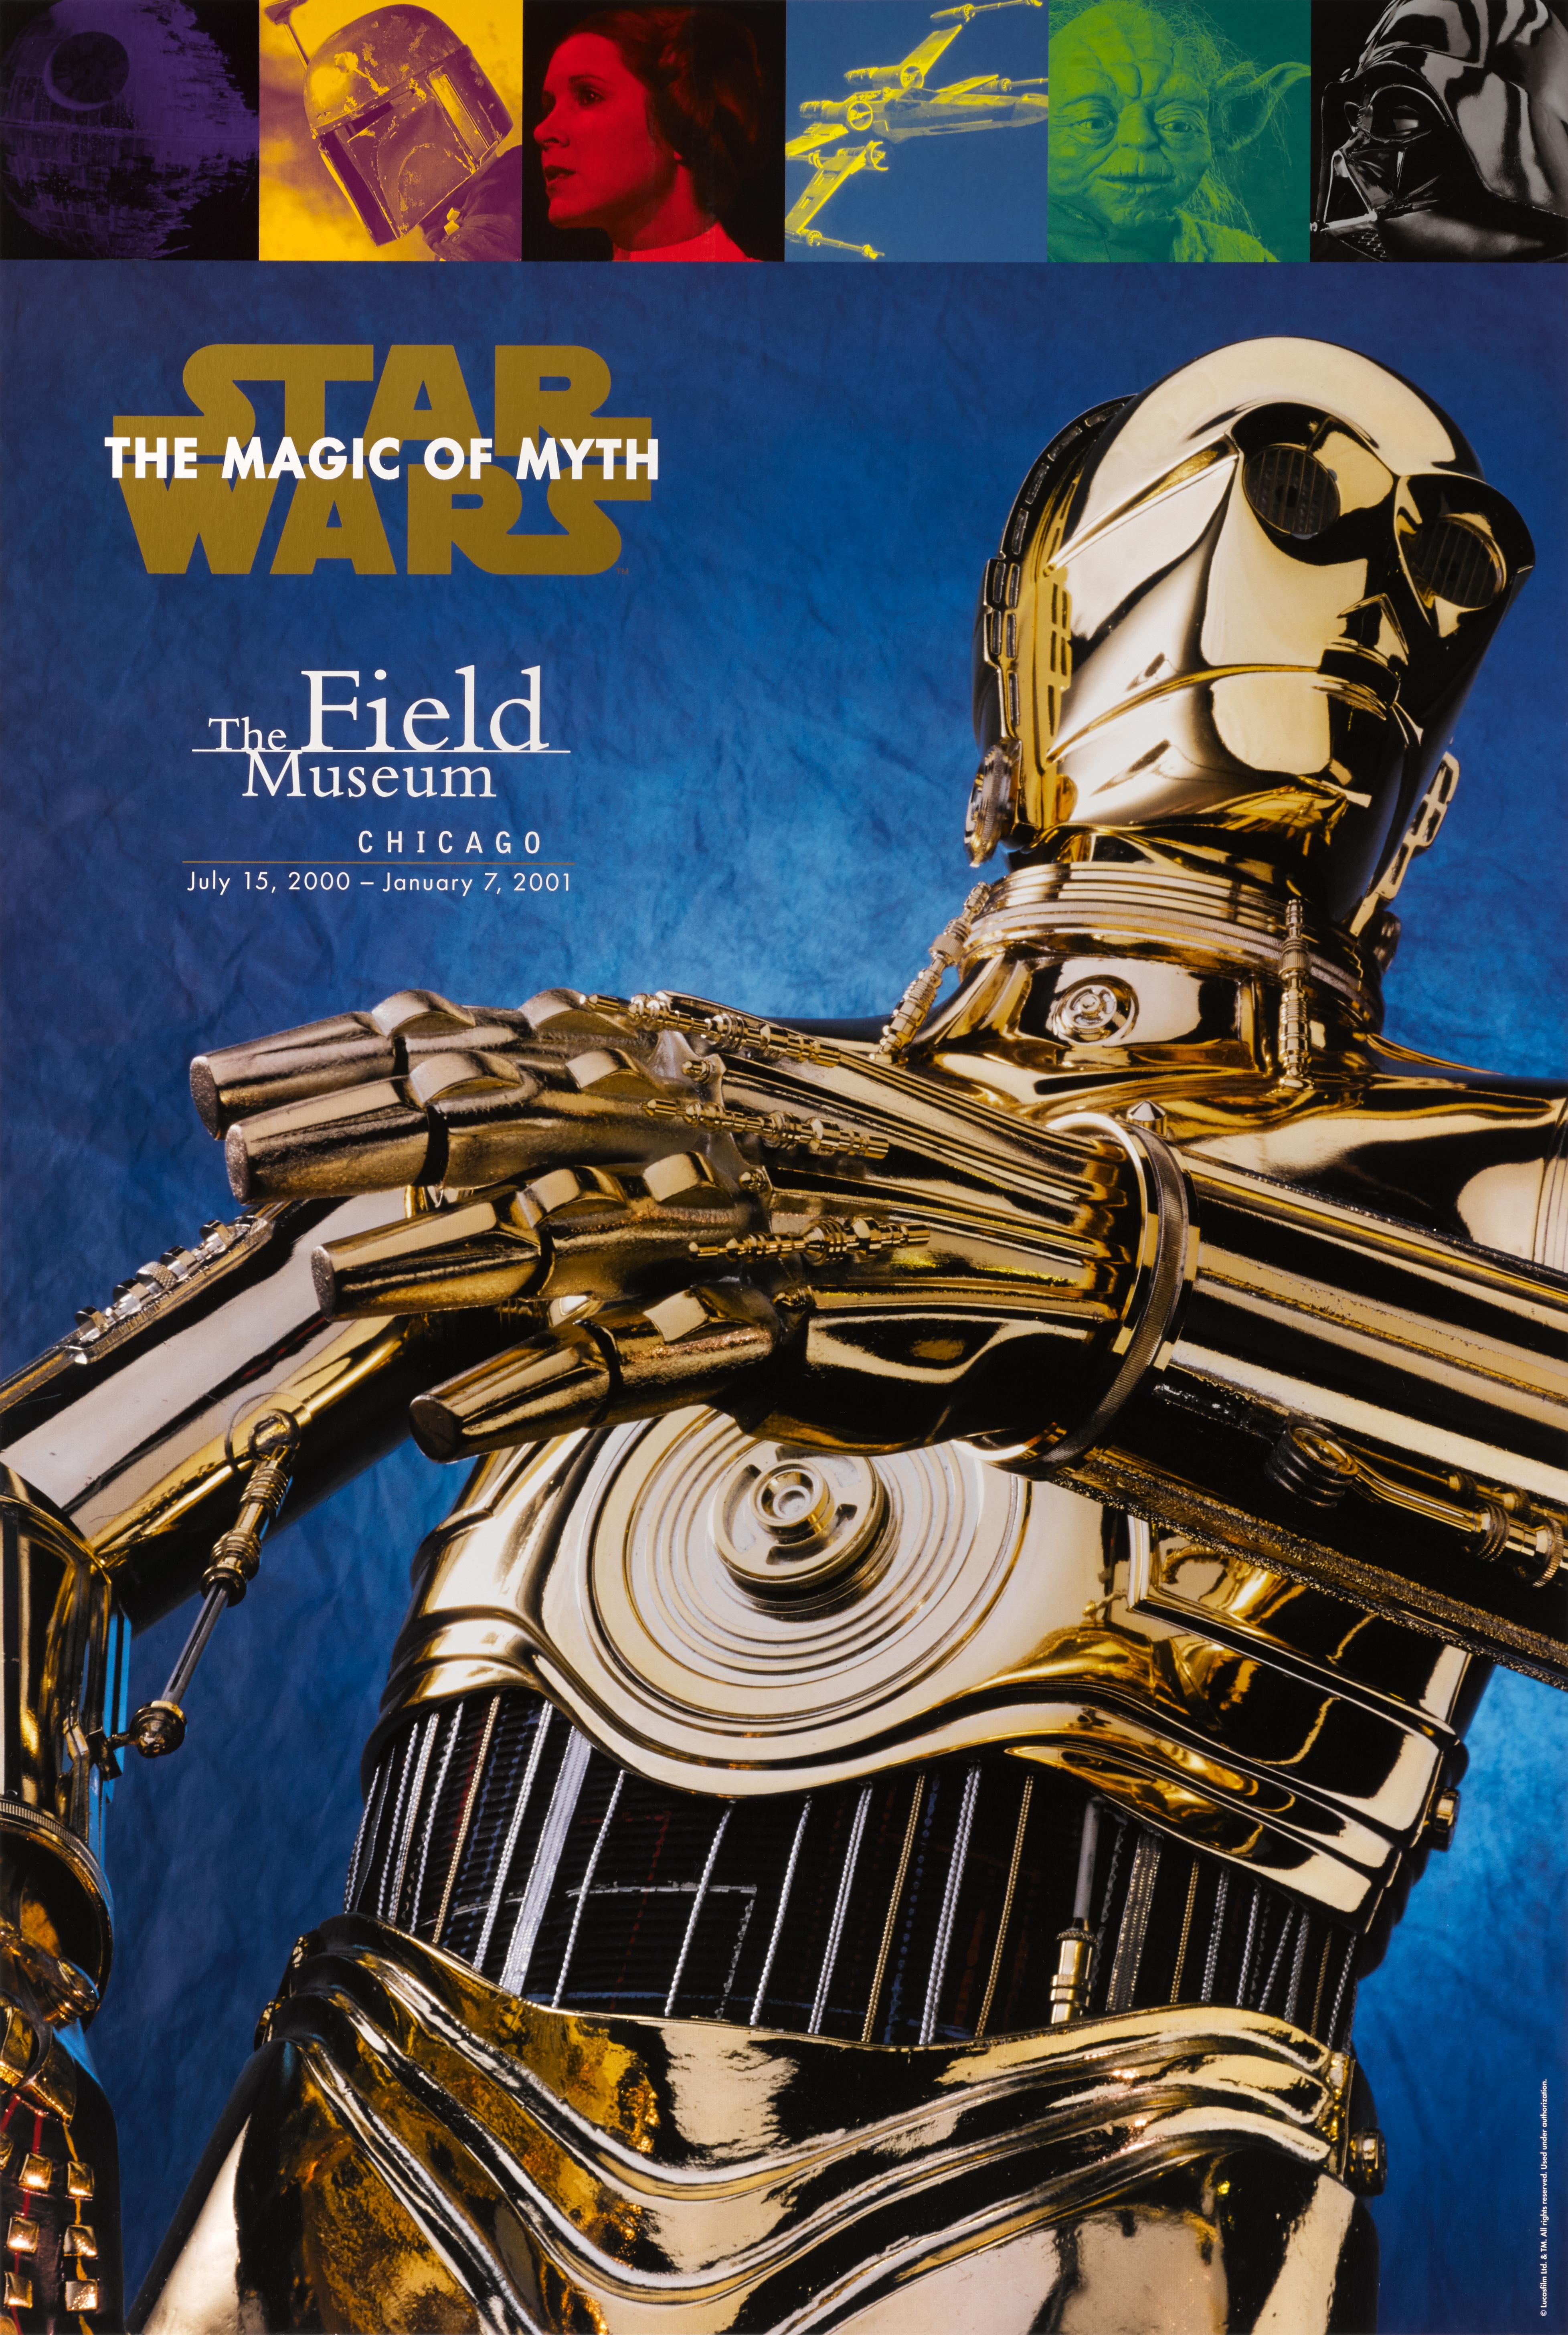 Original American poster for an exhibition titled Star Wars: The Magic of Myth held at The Field Museum Chicago on the 15th July 2000-7th January 2001
This poster is conservation linen backed and unfolded it would be shipped rolled in a strong tube.